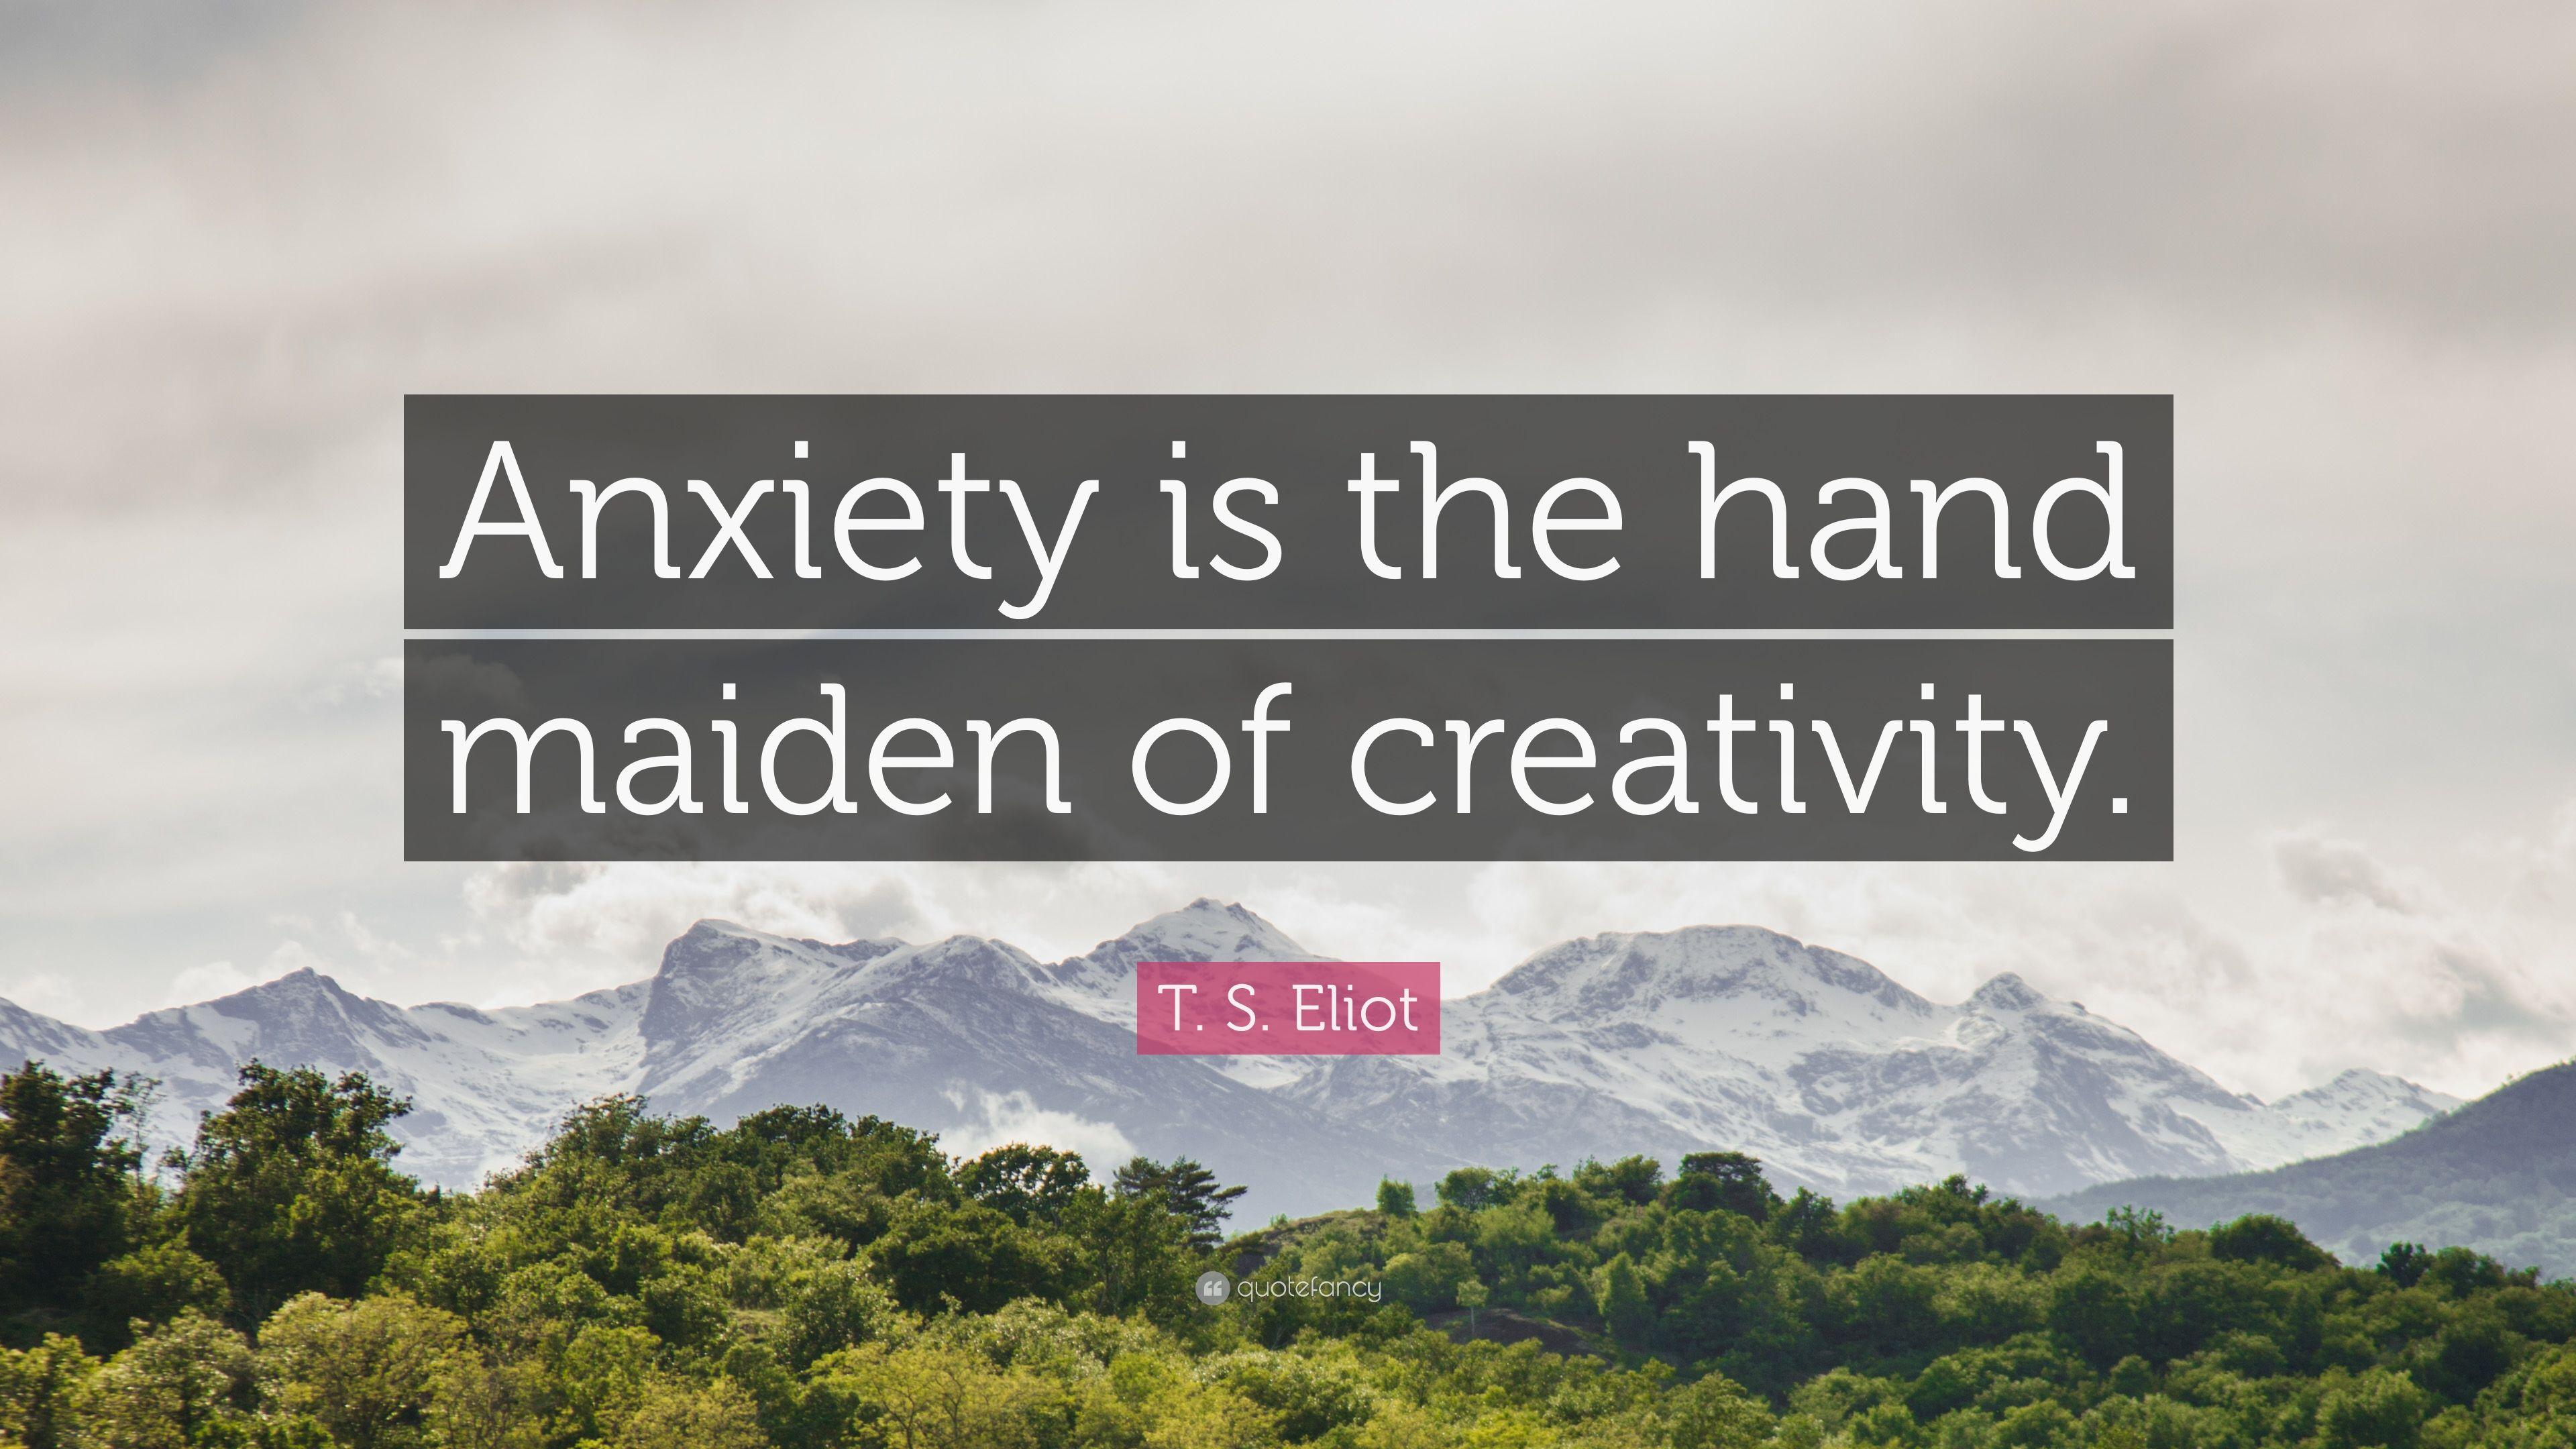 T. S. Eliot Quote: “Anxiety is the hand maiden of creativity.” 12